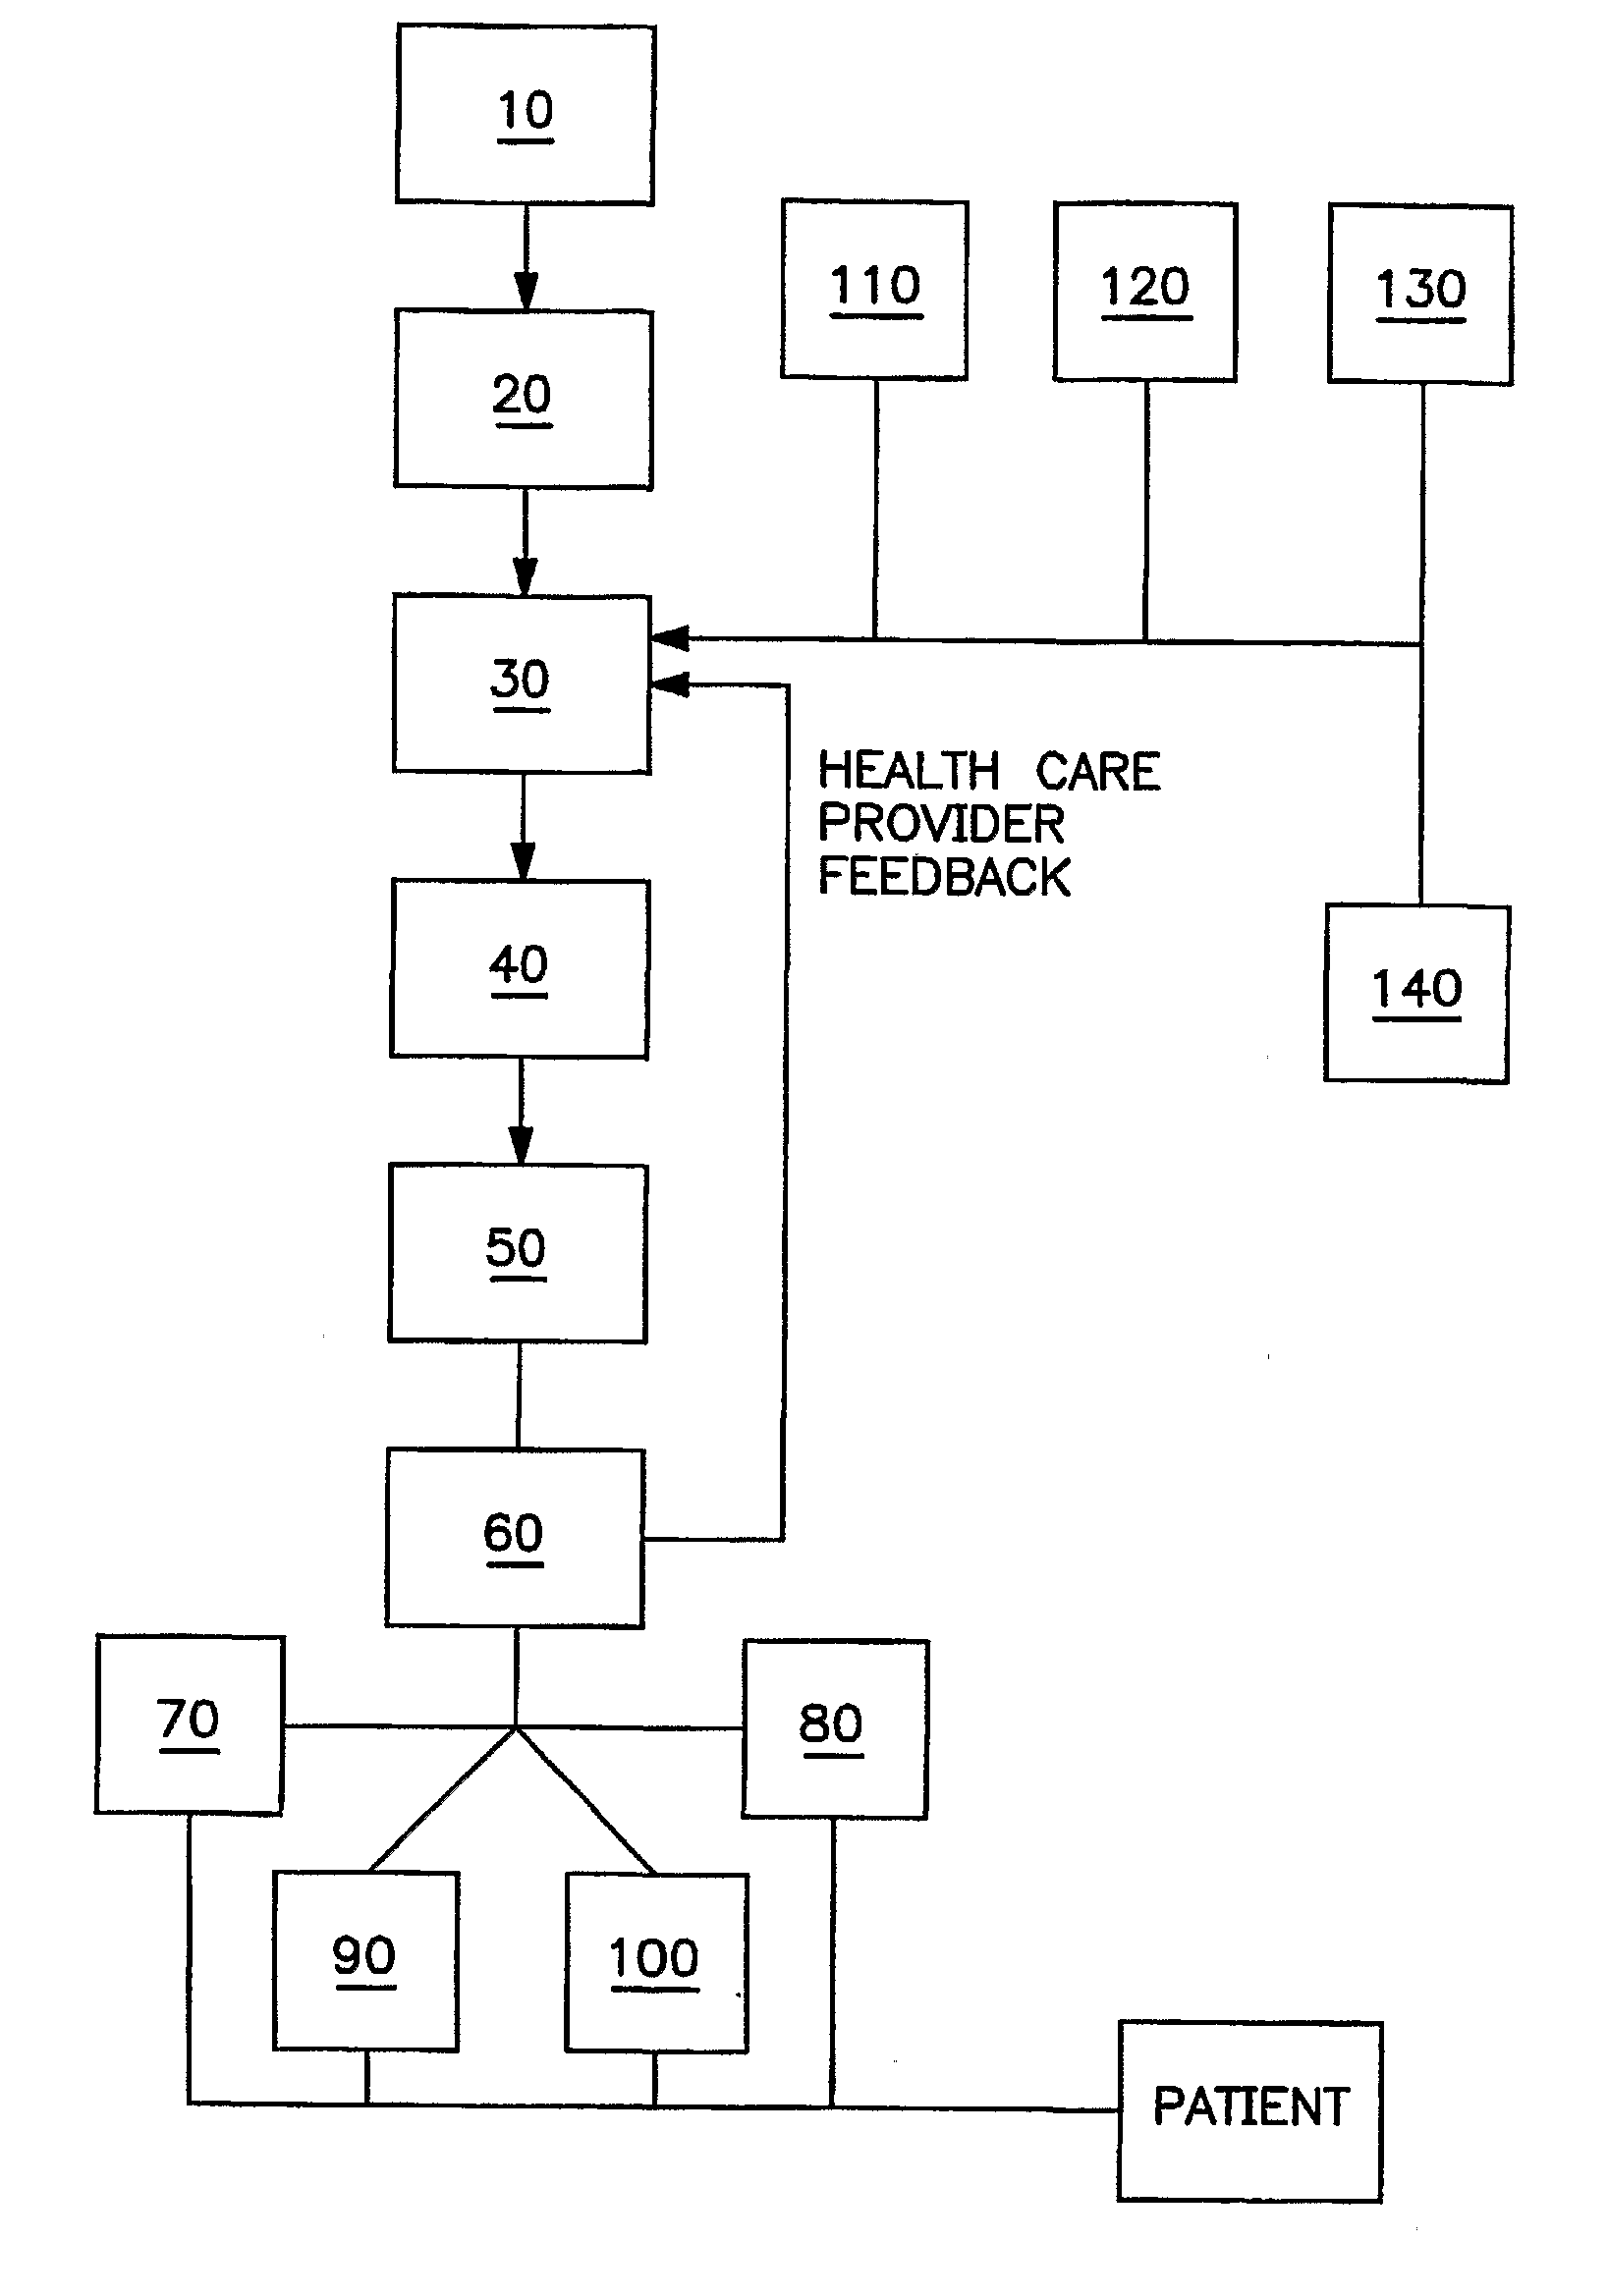 Method for Developing and Marketing a Post Operative Home Recovery Kit for Use by a Patient After Discharge From a Hospital and for Recuperation At Home